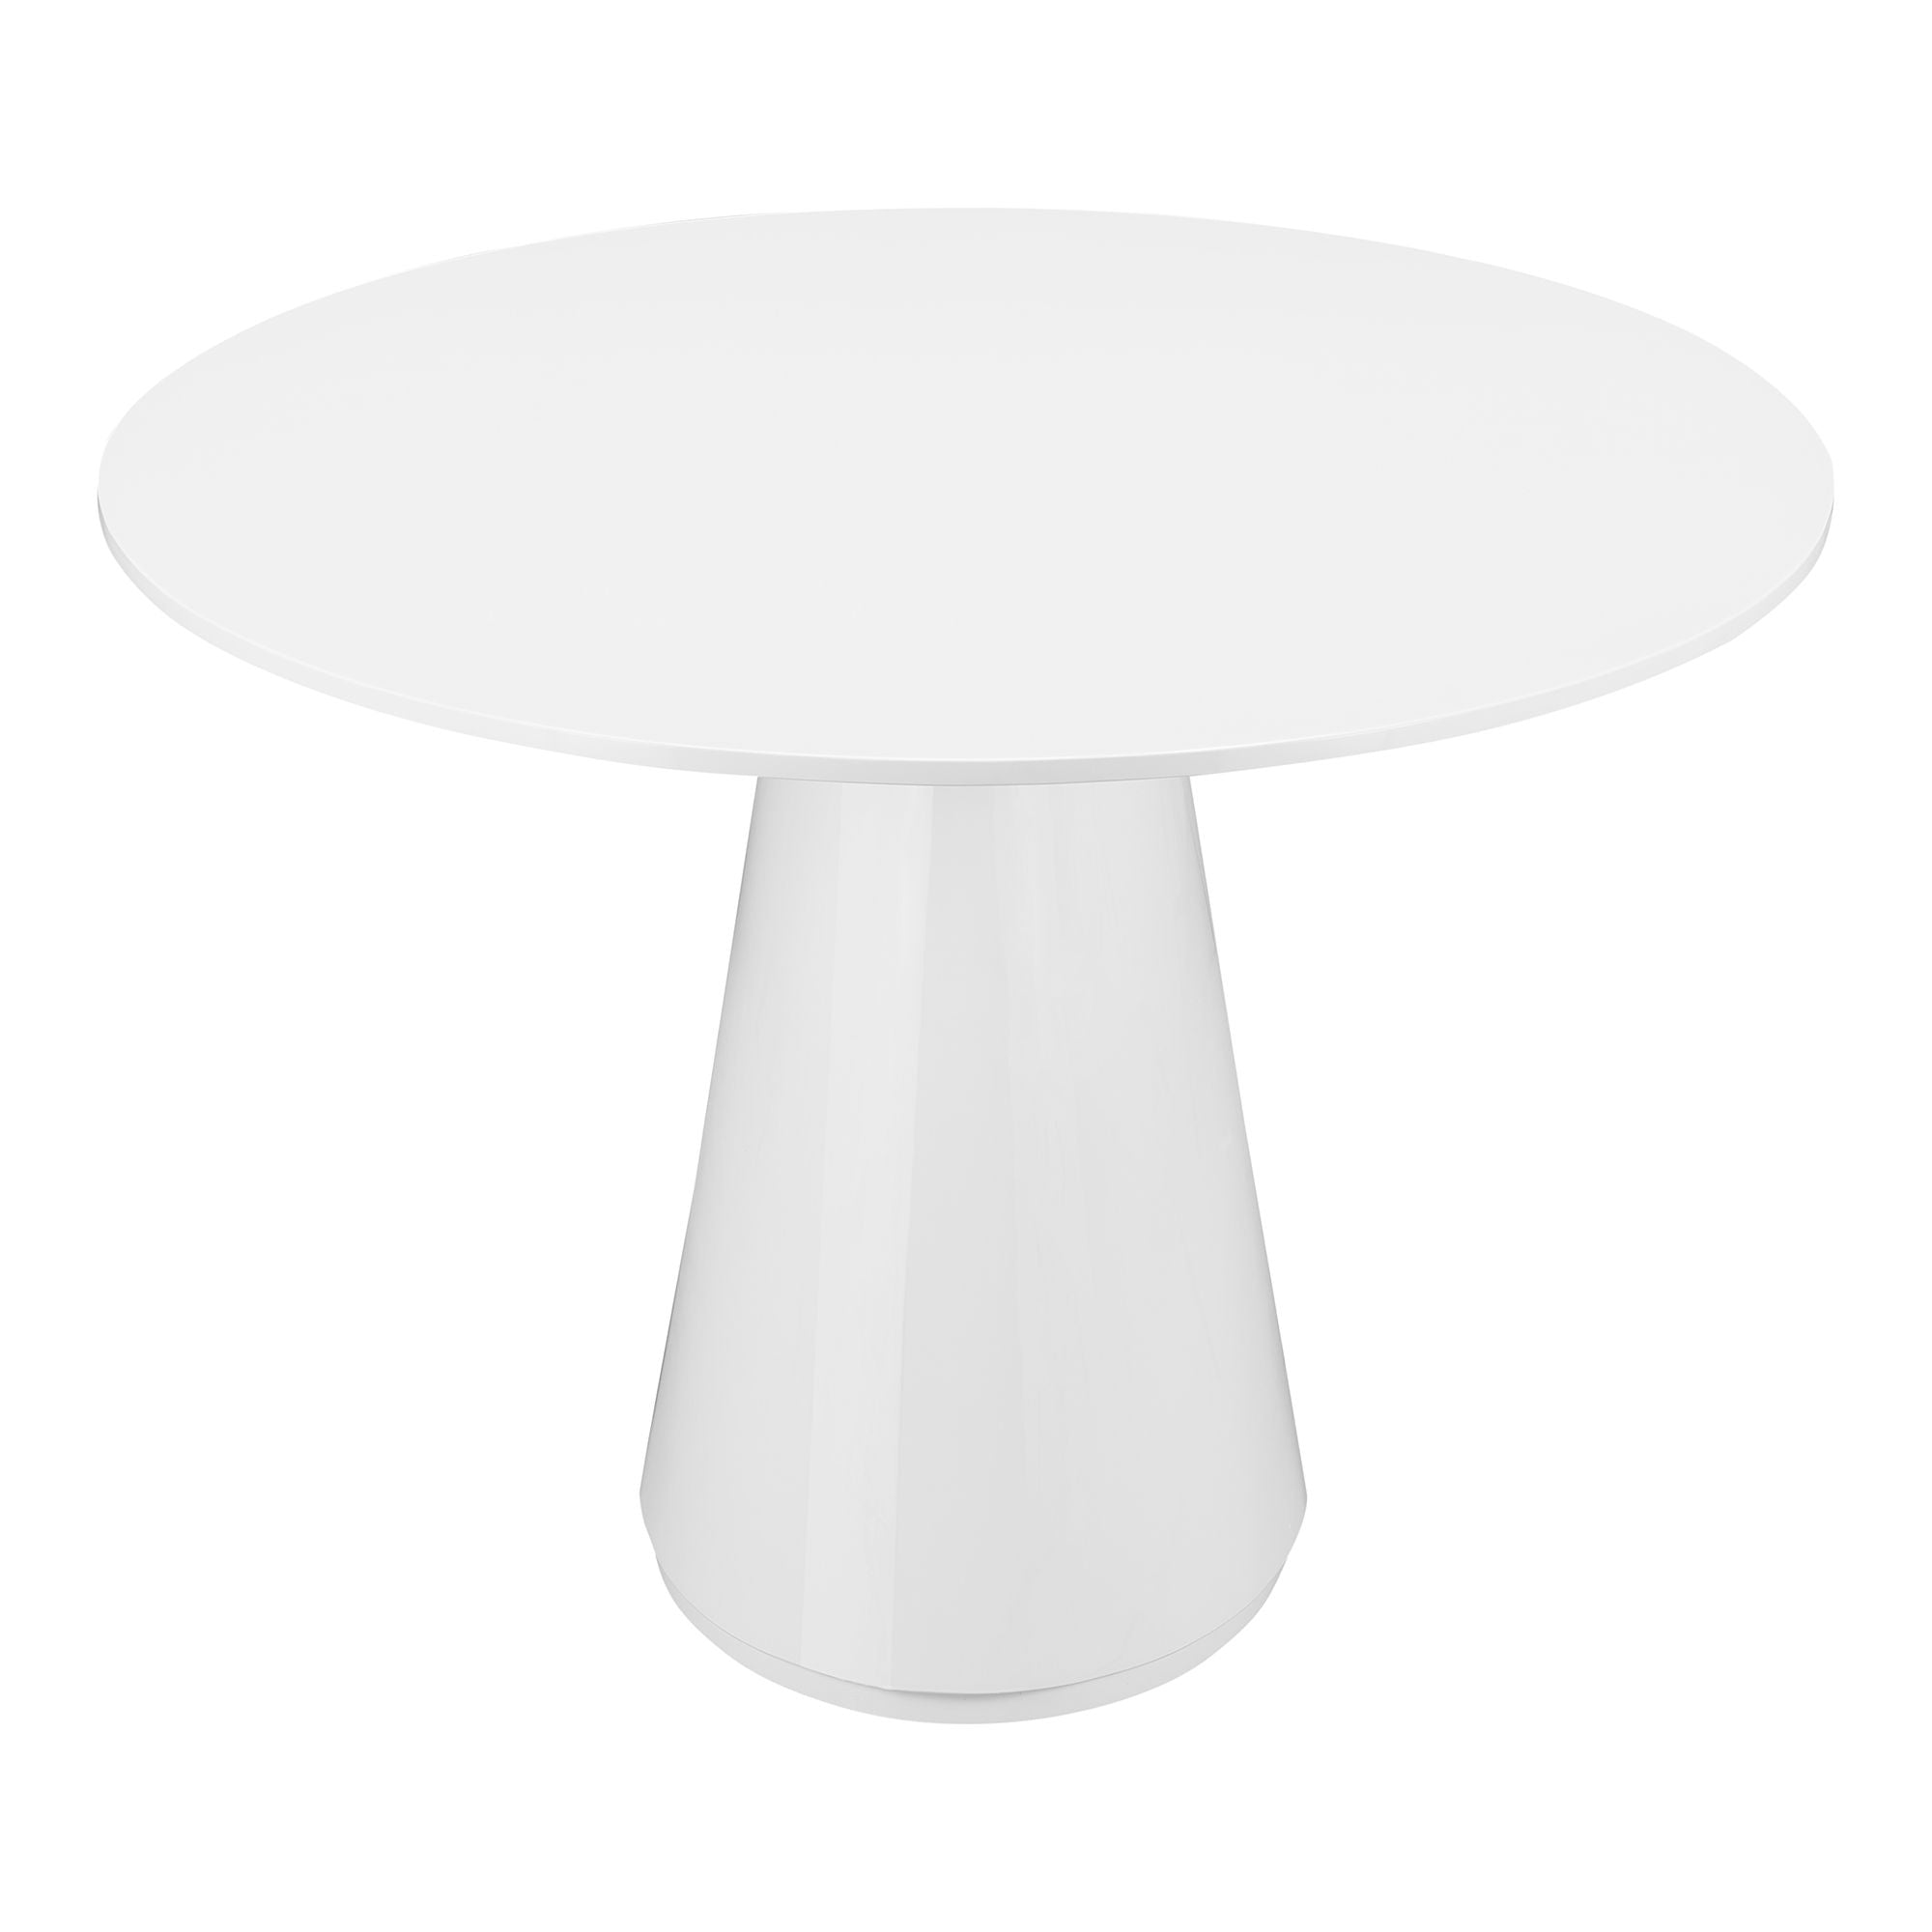 Otago - Oval Dining Table Wood - White